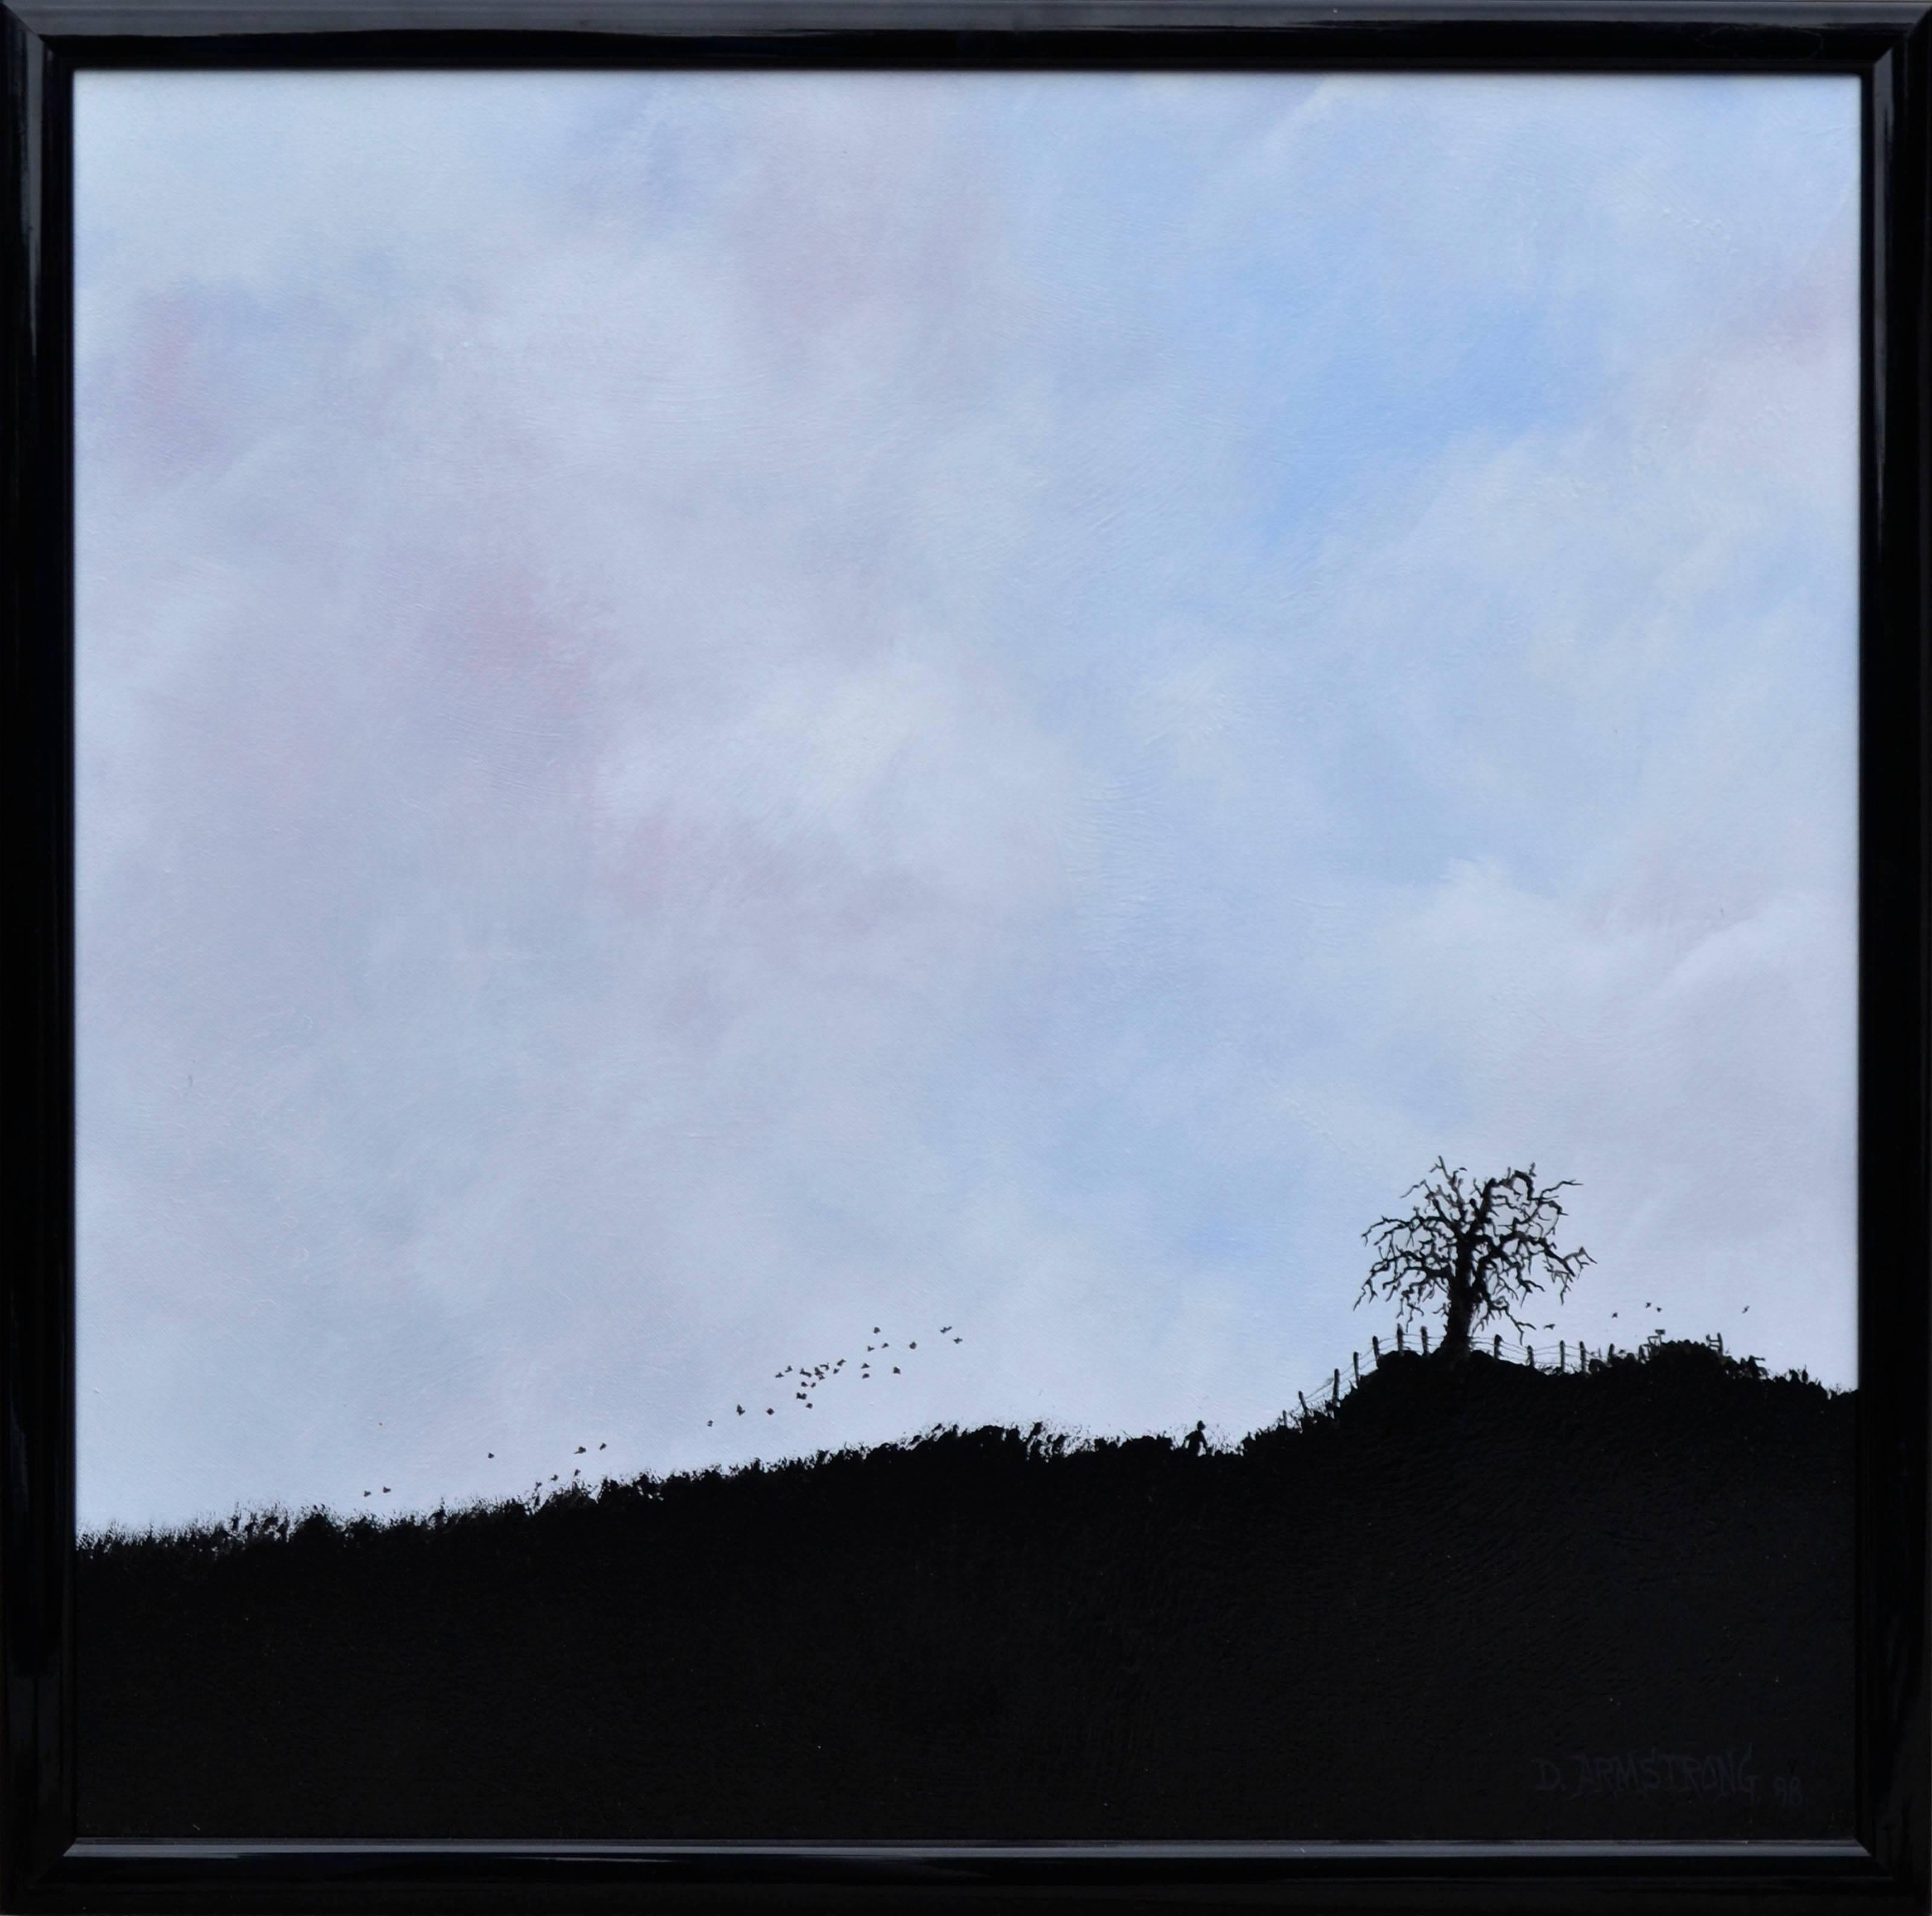 Duane Albert Armstrong Landscape Painting - "Day's End" - Minimal Silhouetted Landscape 